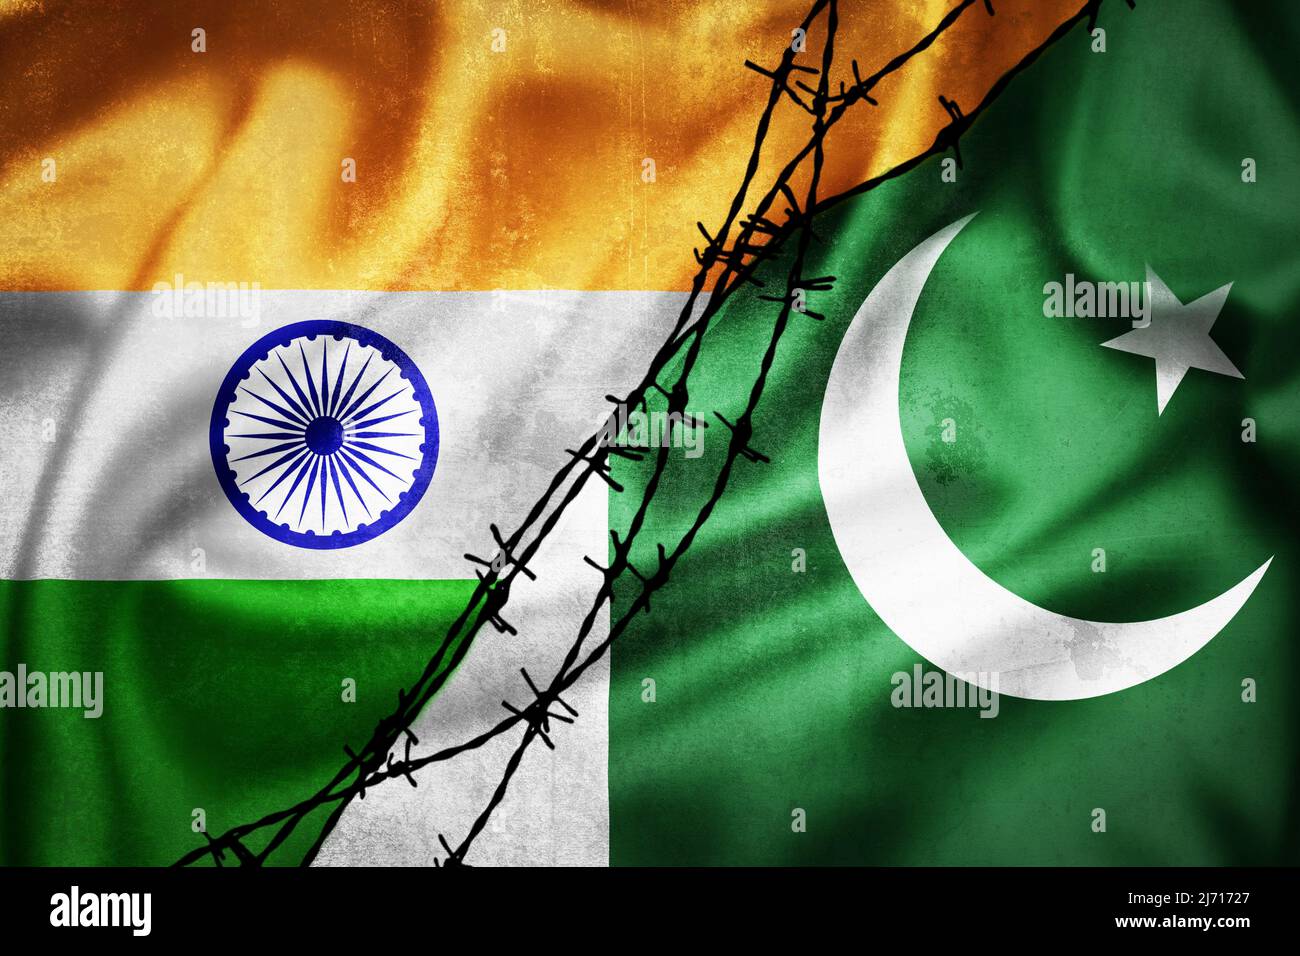 Grunge flags of India and Pakistan divided by barb wire illustration, concept of tense relations between India and Pakistan Stock Photo